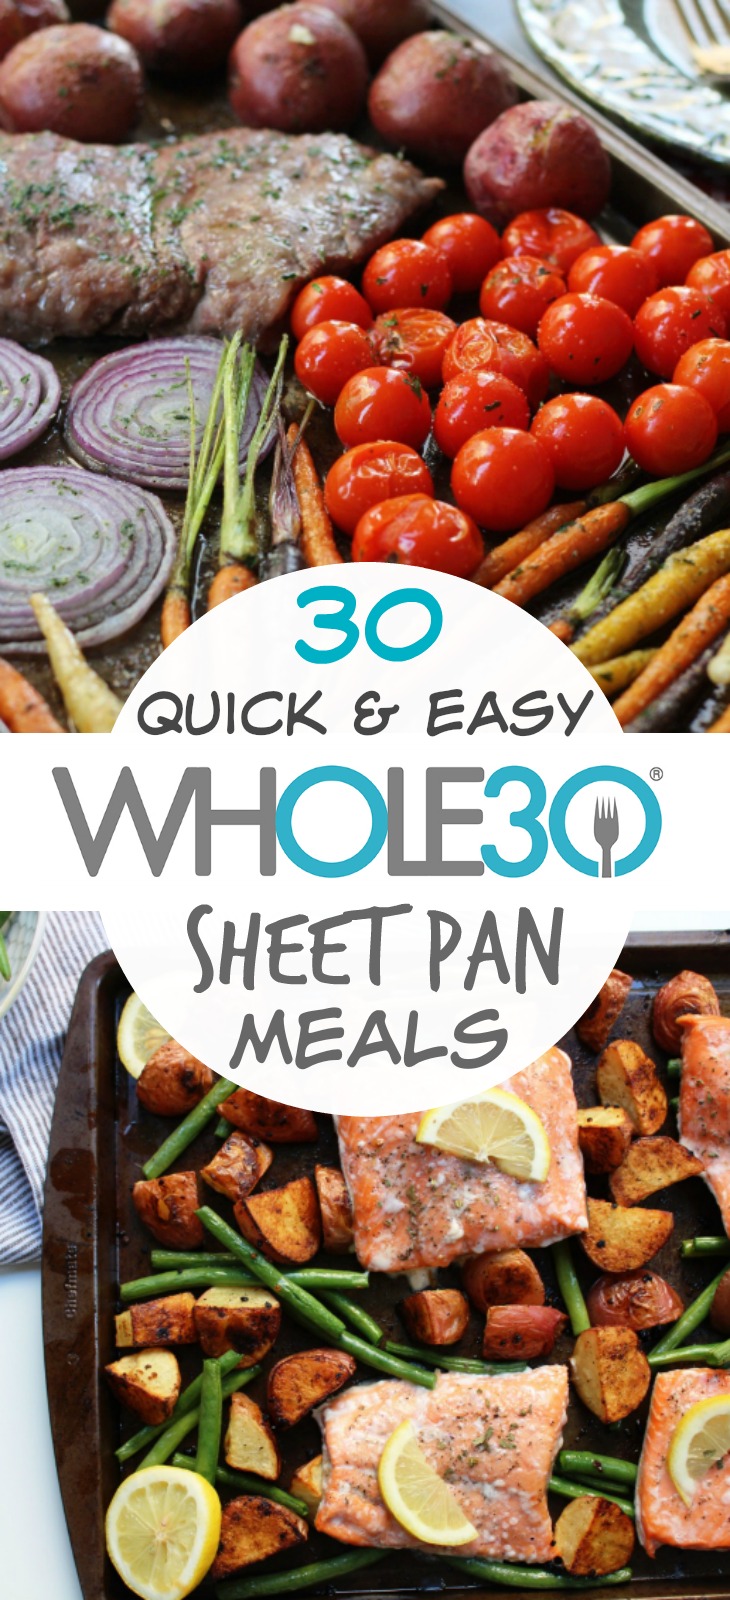 30 Whole30 sheet pan recipes so you spend less time cooking. Whole30 sheet pan meals that are easy meal prep, quick clean up, and family friendly healthy recipes. Includes Whole30 and Paleo sheet pan fish, chicken, beef and breakfast recipes. #whole30sheetpan #paleosheetpan #whole30dinnerrecipes via @paleobailey